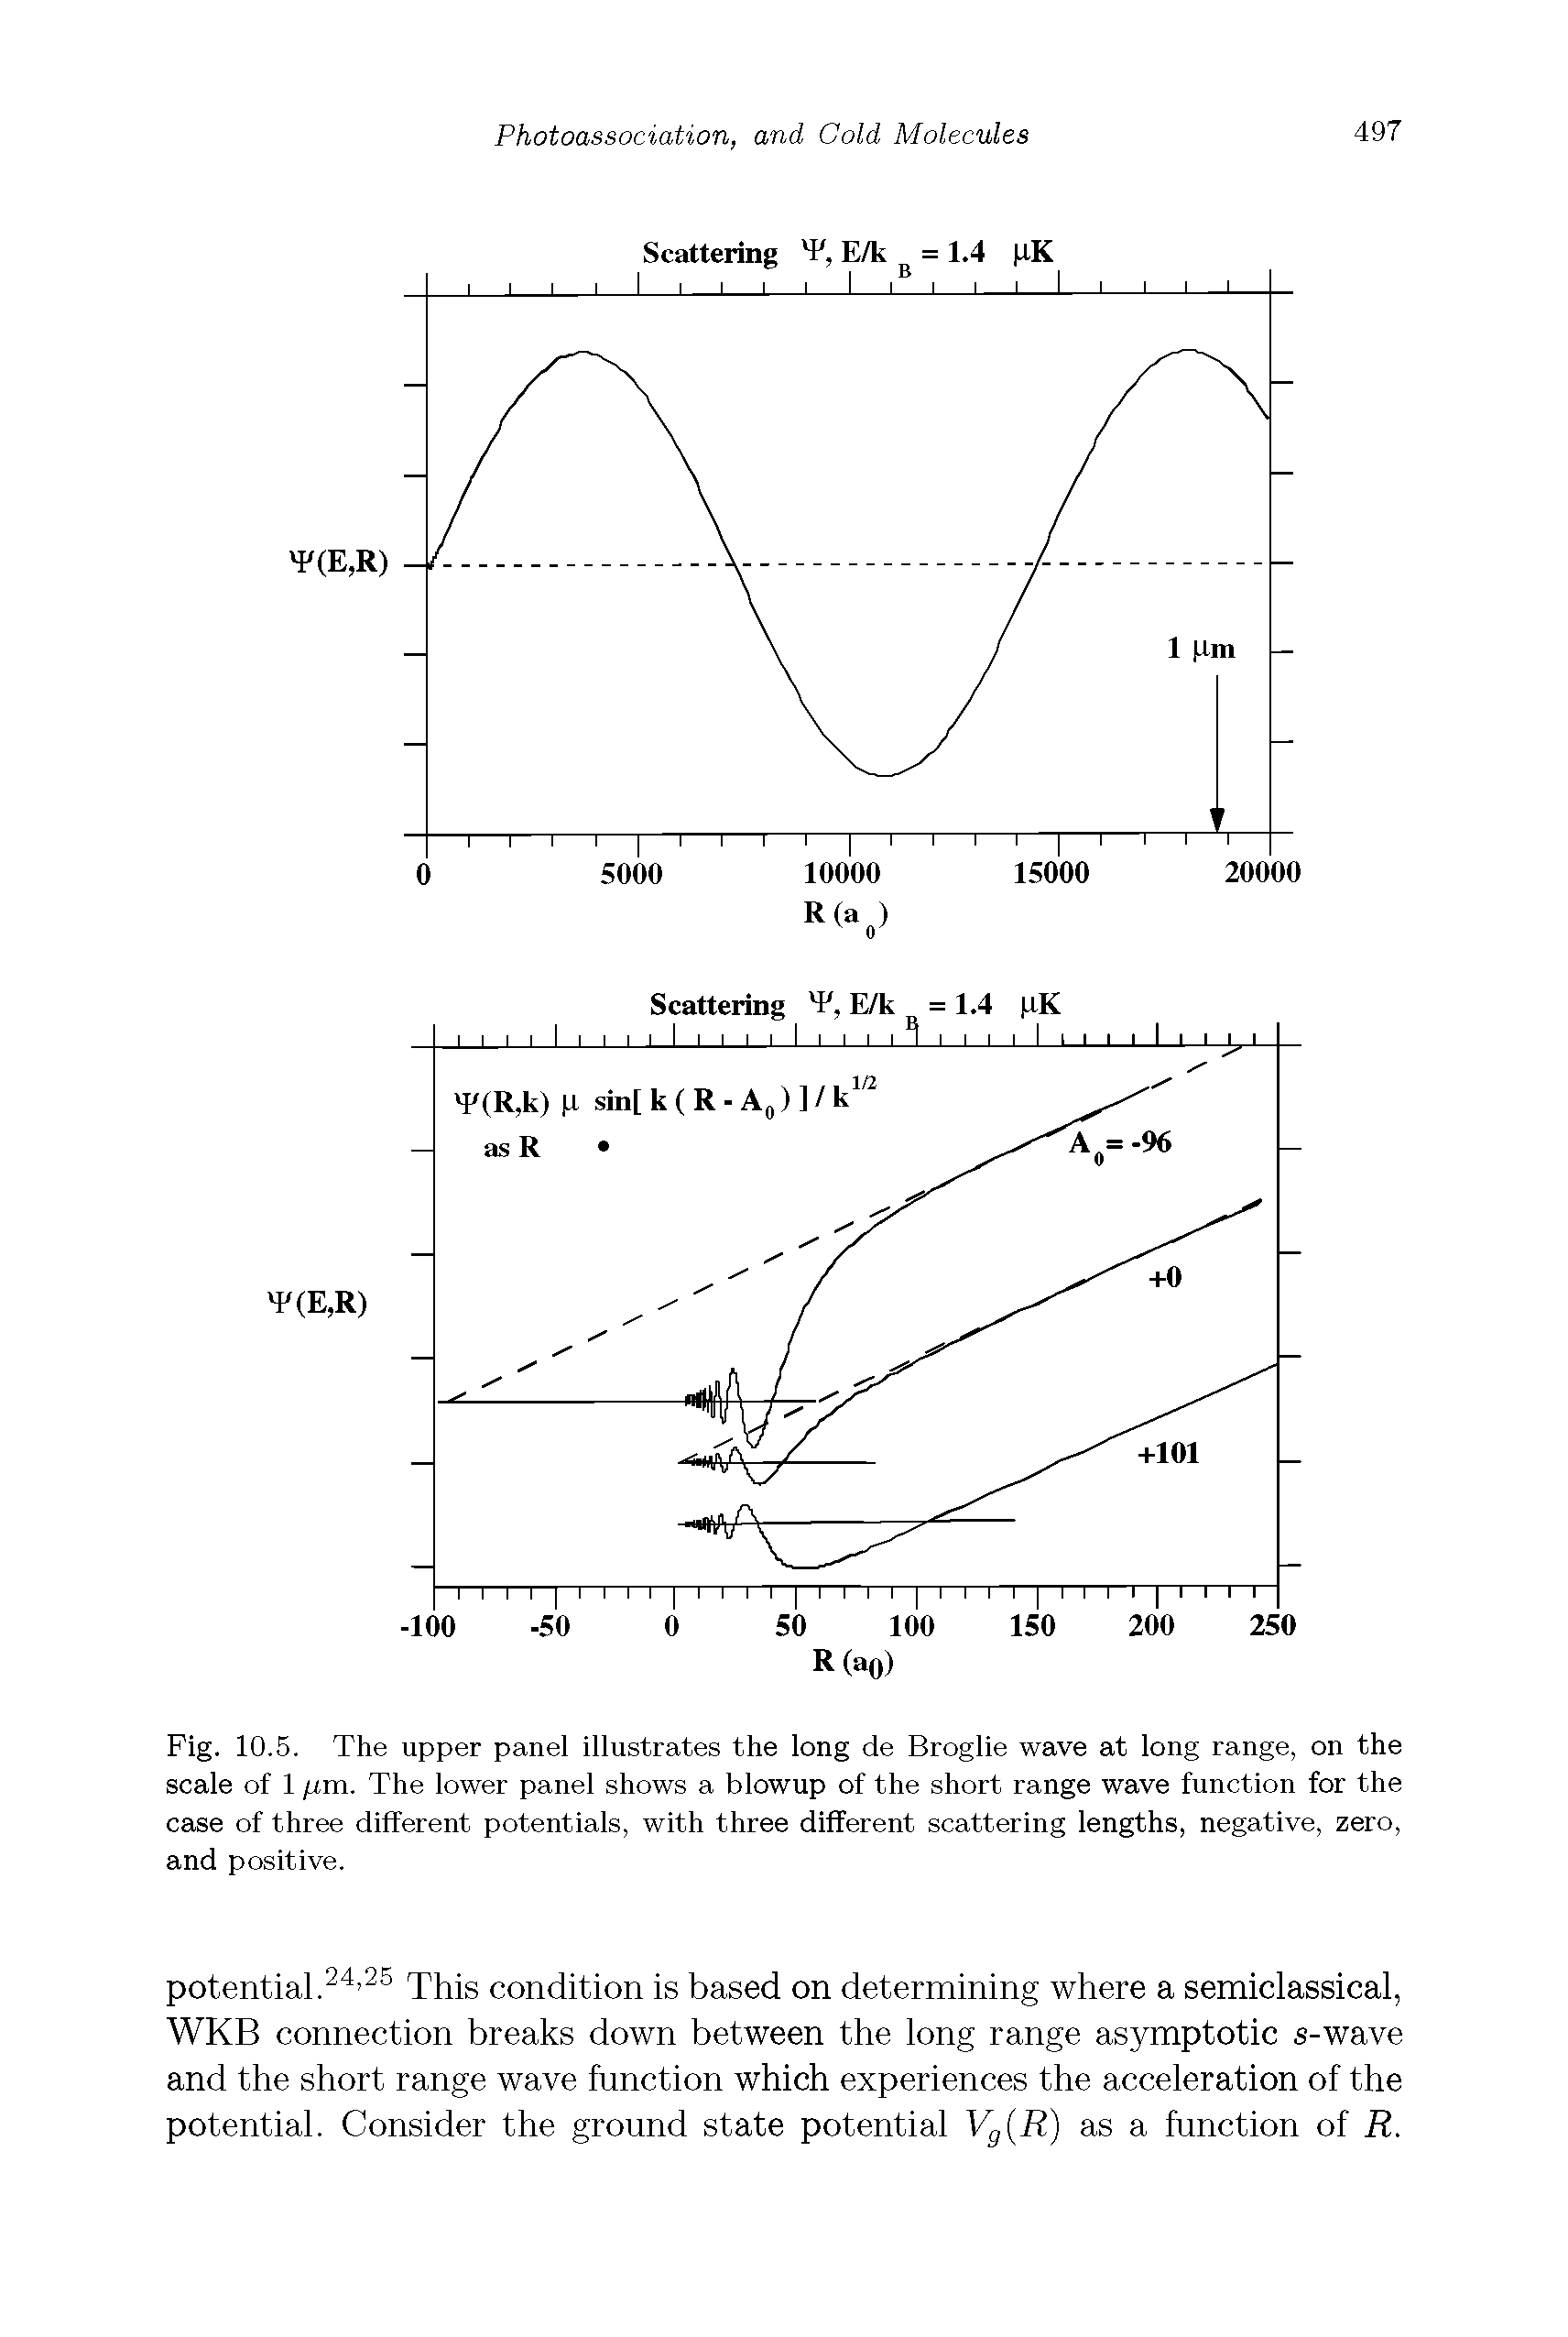 Fig. 10.5. The upper panel illustrates the long de Broglie wave at long range, on the scale of 1 fxm. The lower panel shows a blowup of the short range wave function for the case of three different potentials, with three different scattering lengths, negative, zero, and positive.